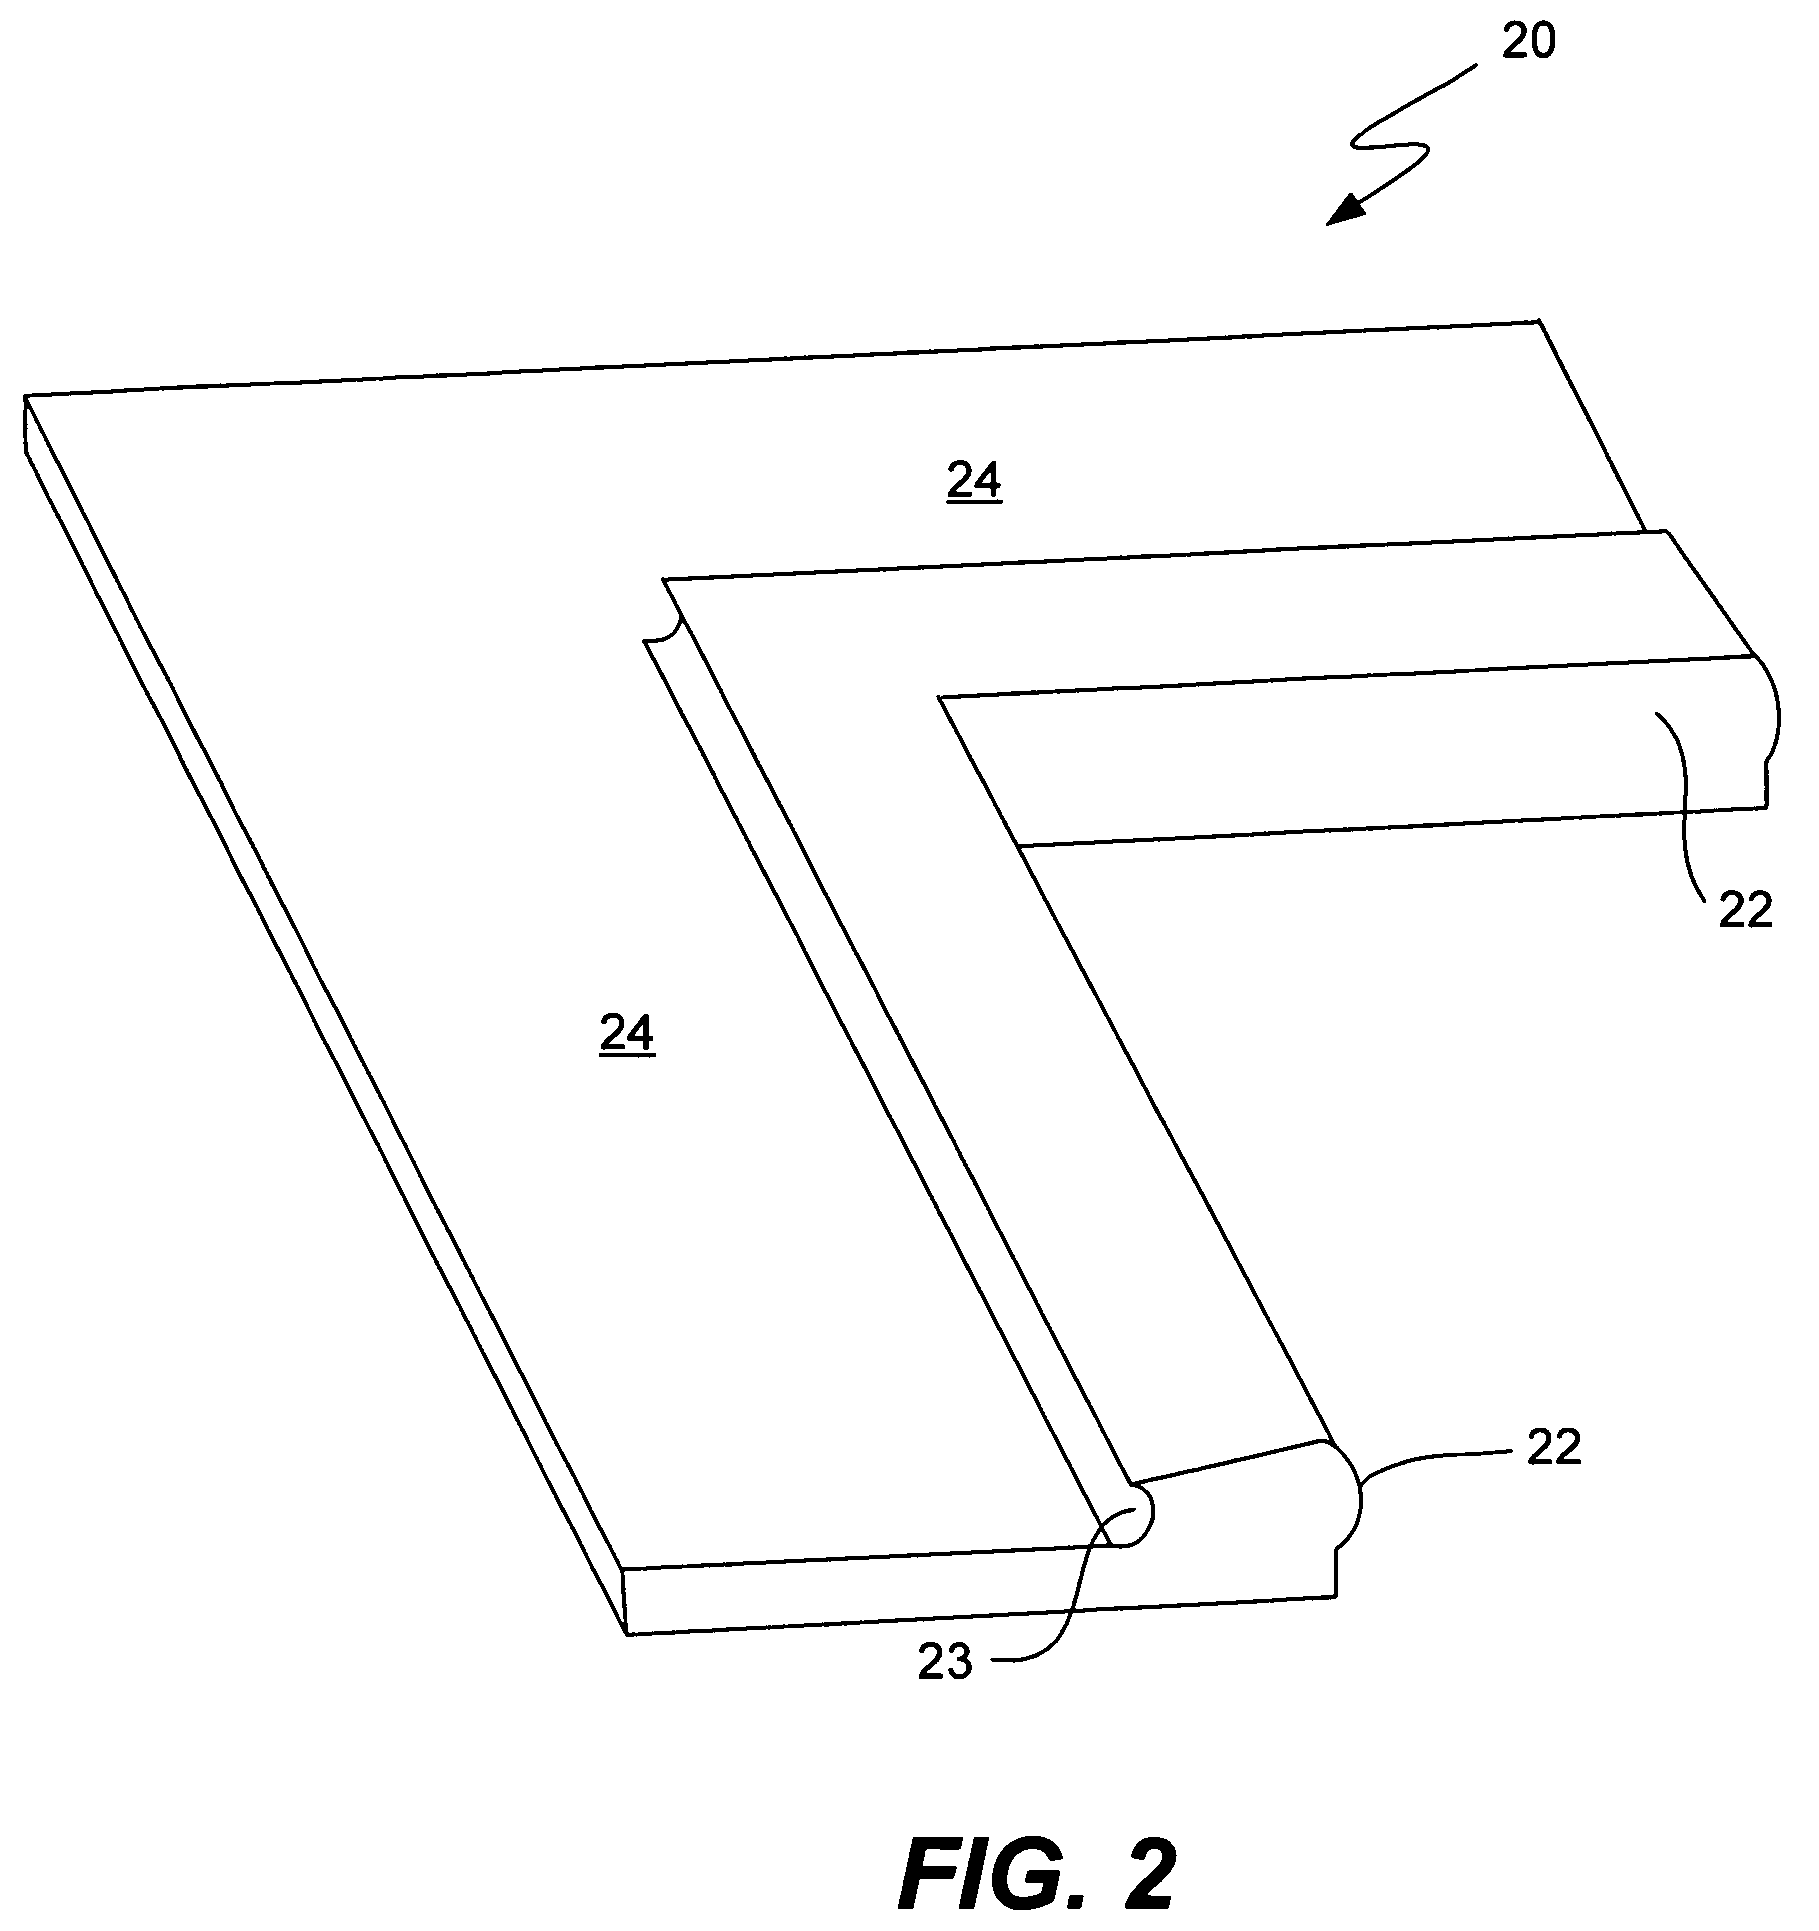 Apparatus and method for an improved lens structure for polymer wave guides which maximizes free space light coupling